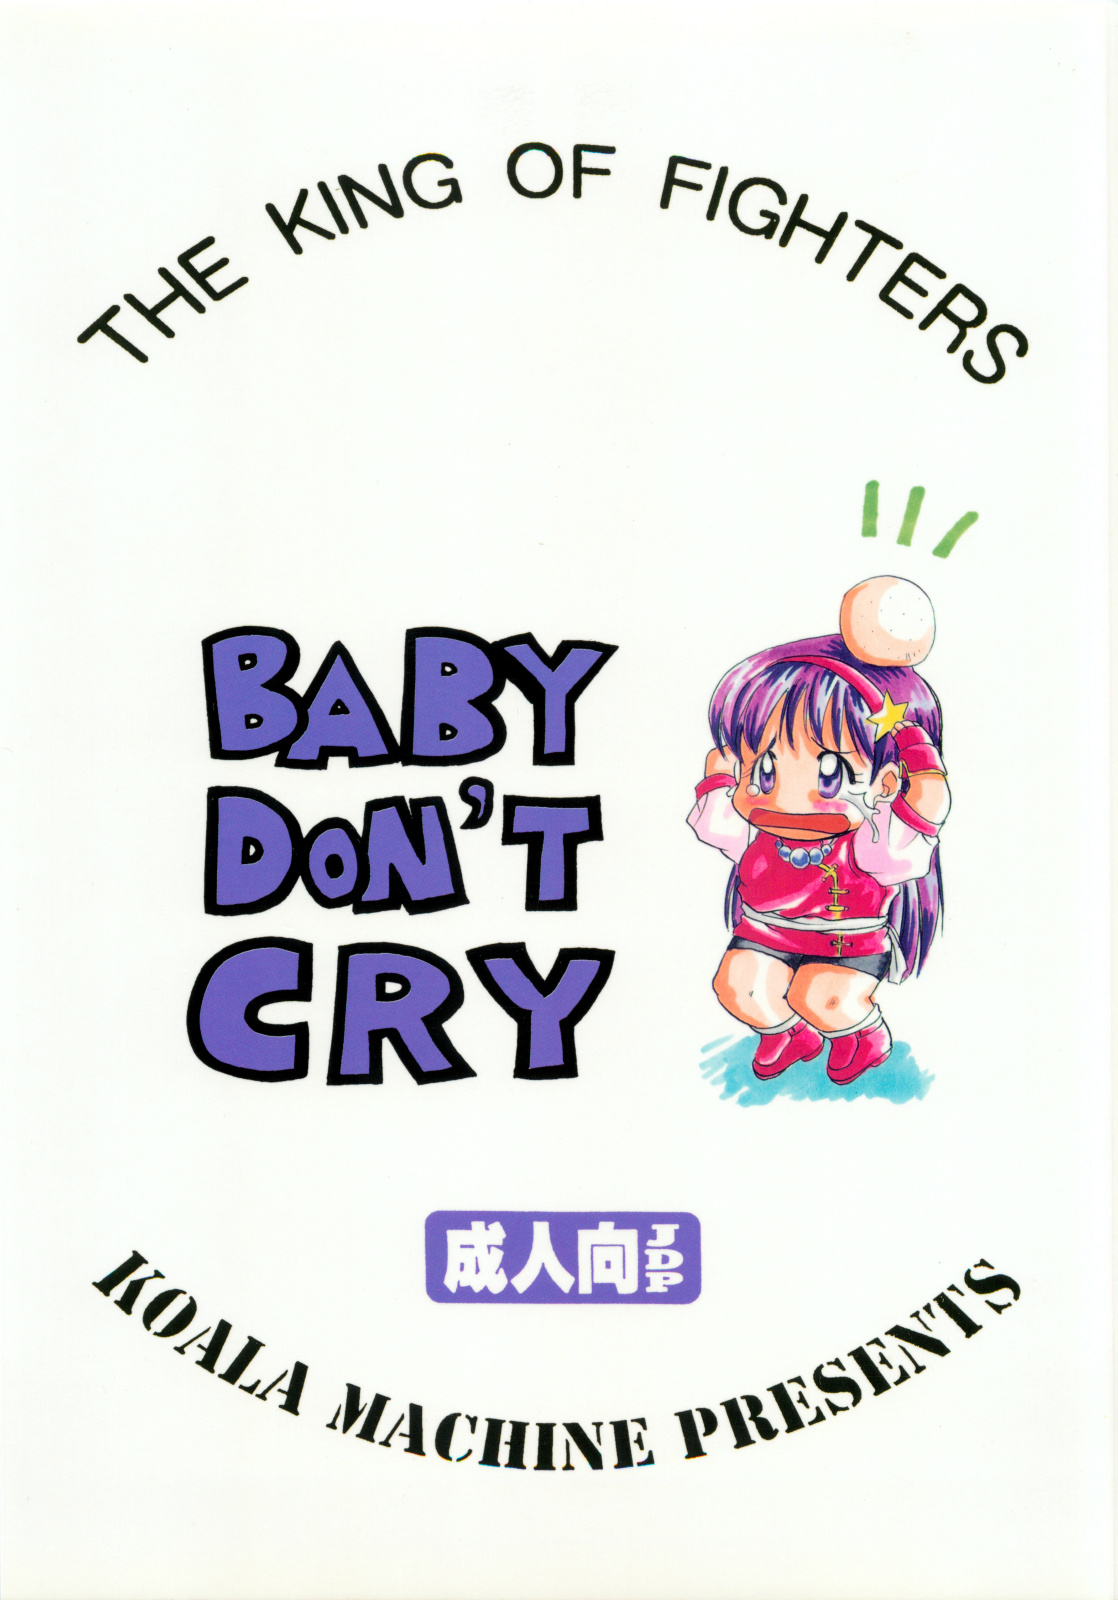 [Koala Machine(Tokiwata Miki)] BABY DON&#039;T CRY (King of Fighters) [コアラマシン(ときわ鐘成)] BABY DON&#039;T CRY (キング･オブ･ファイターズ)